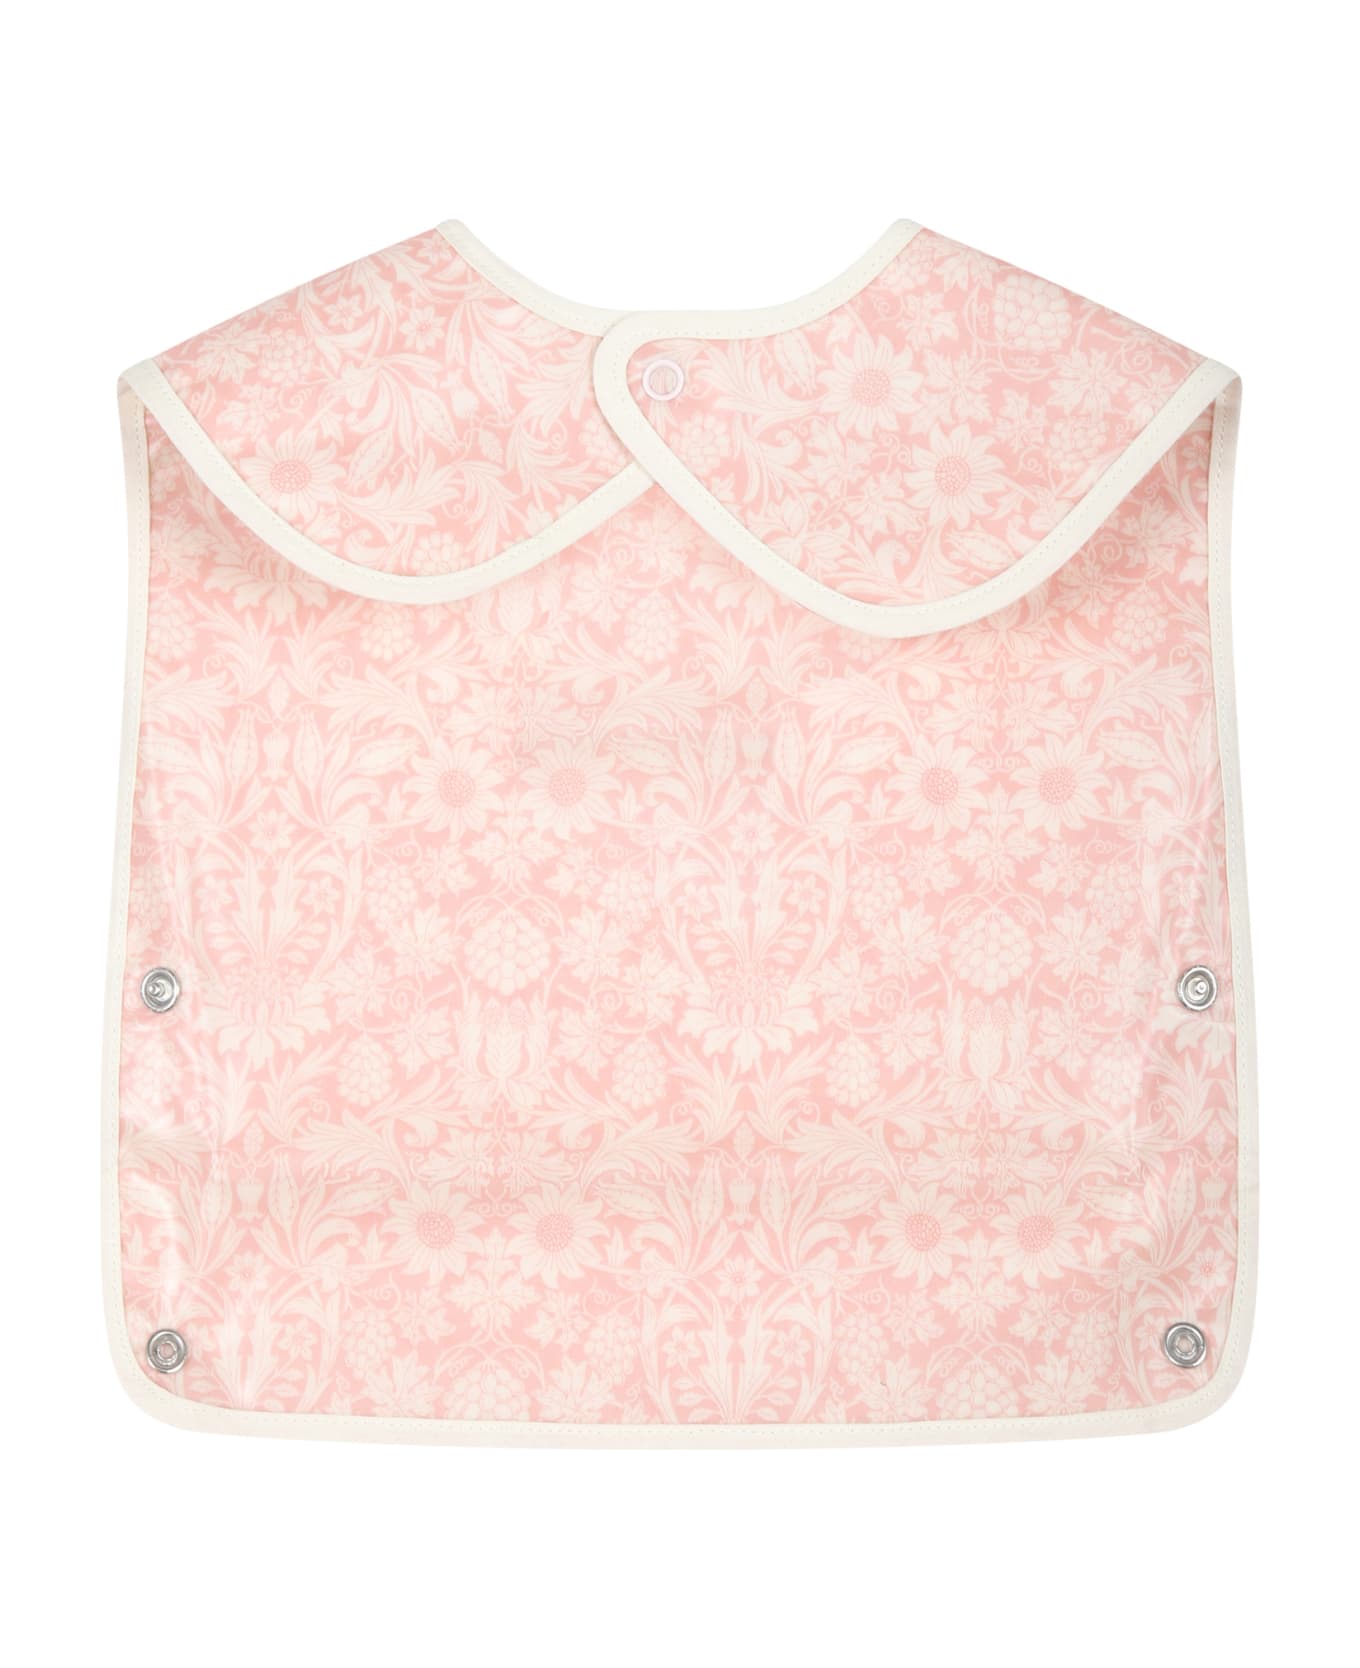 Bonpoint Pink Bib For Baby Girl With Flower Print - Rosa アクセサリー＆ギフト